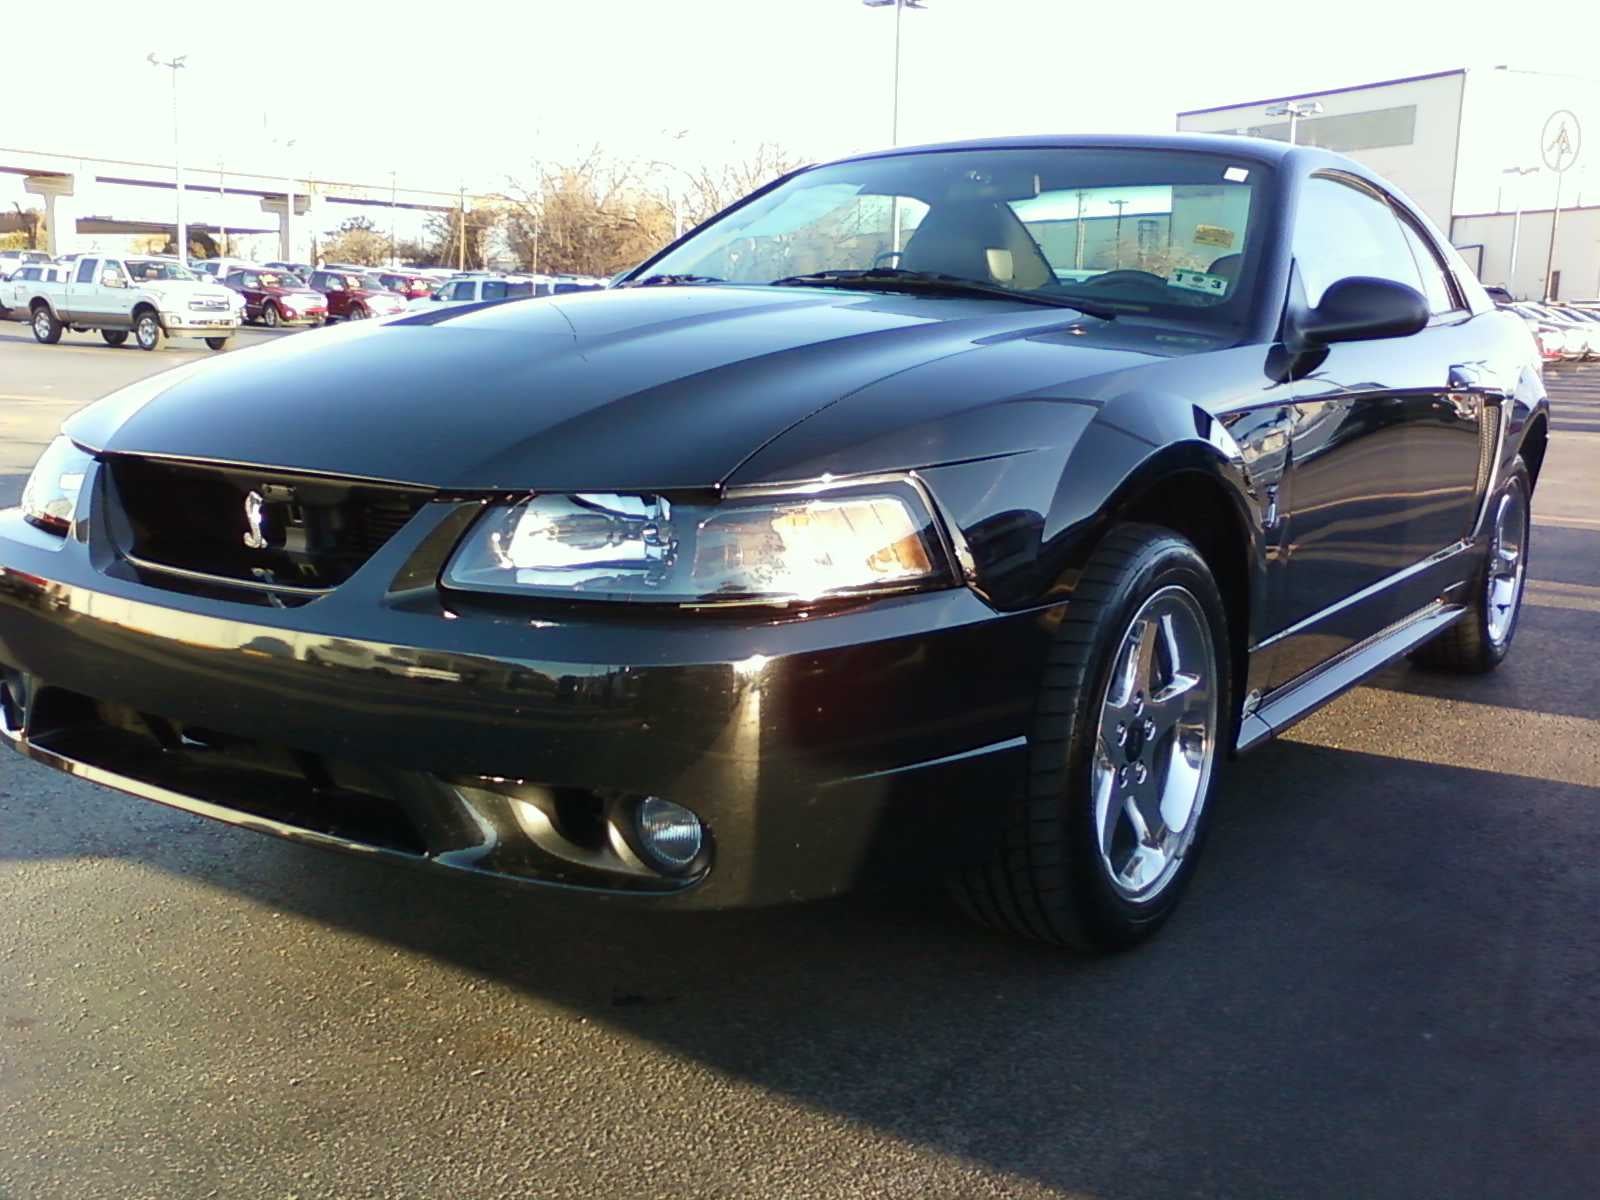 2001 Ford mustang cobra svt coupe specs #5